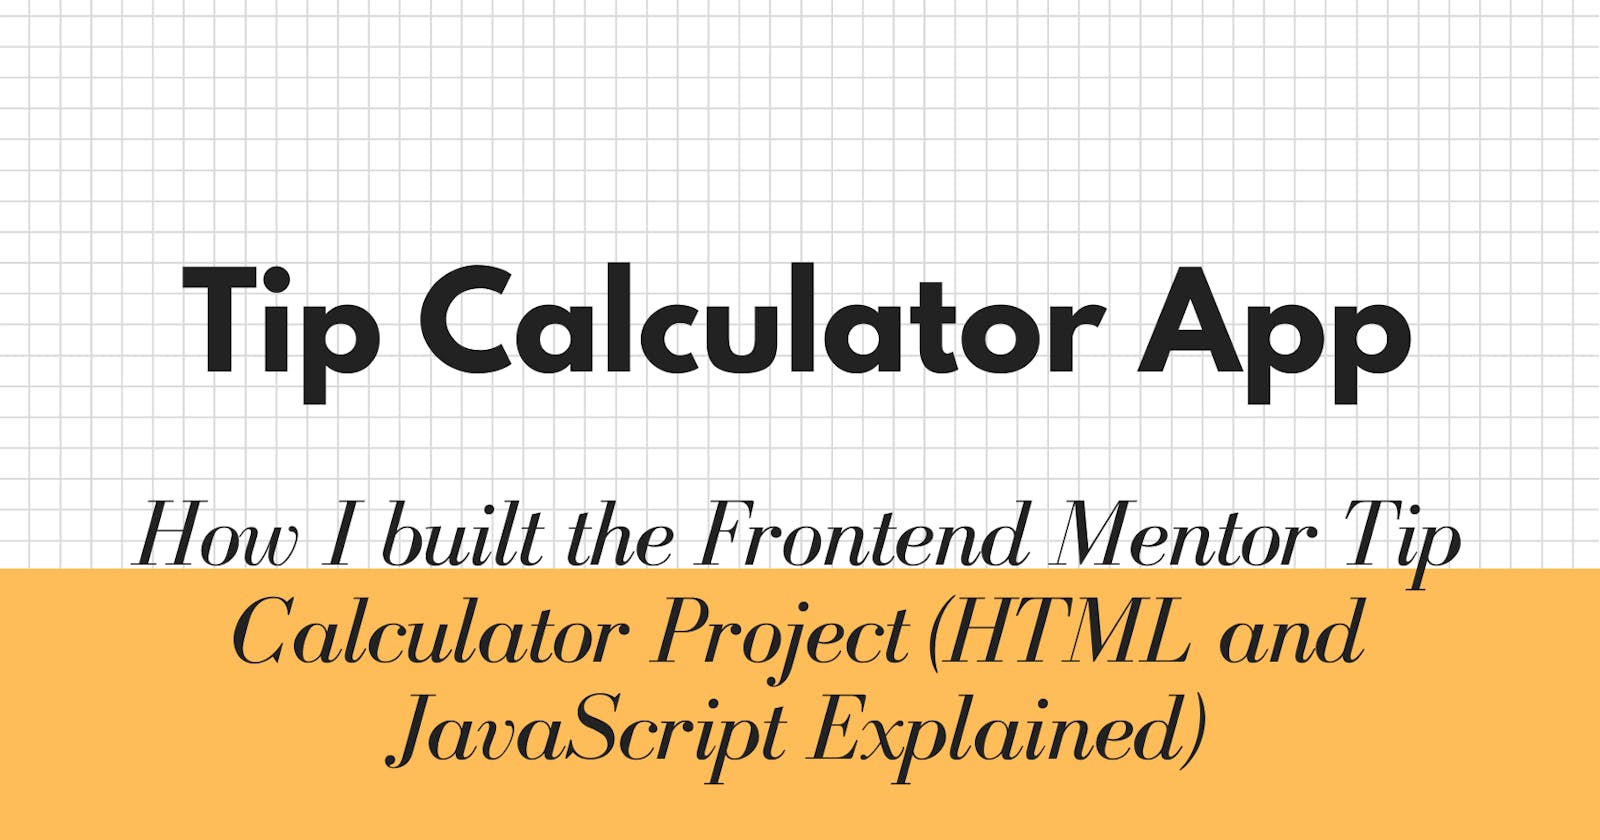 How I Built the Frontend Mentor Tip Calculator Application